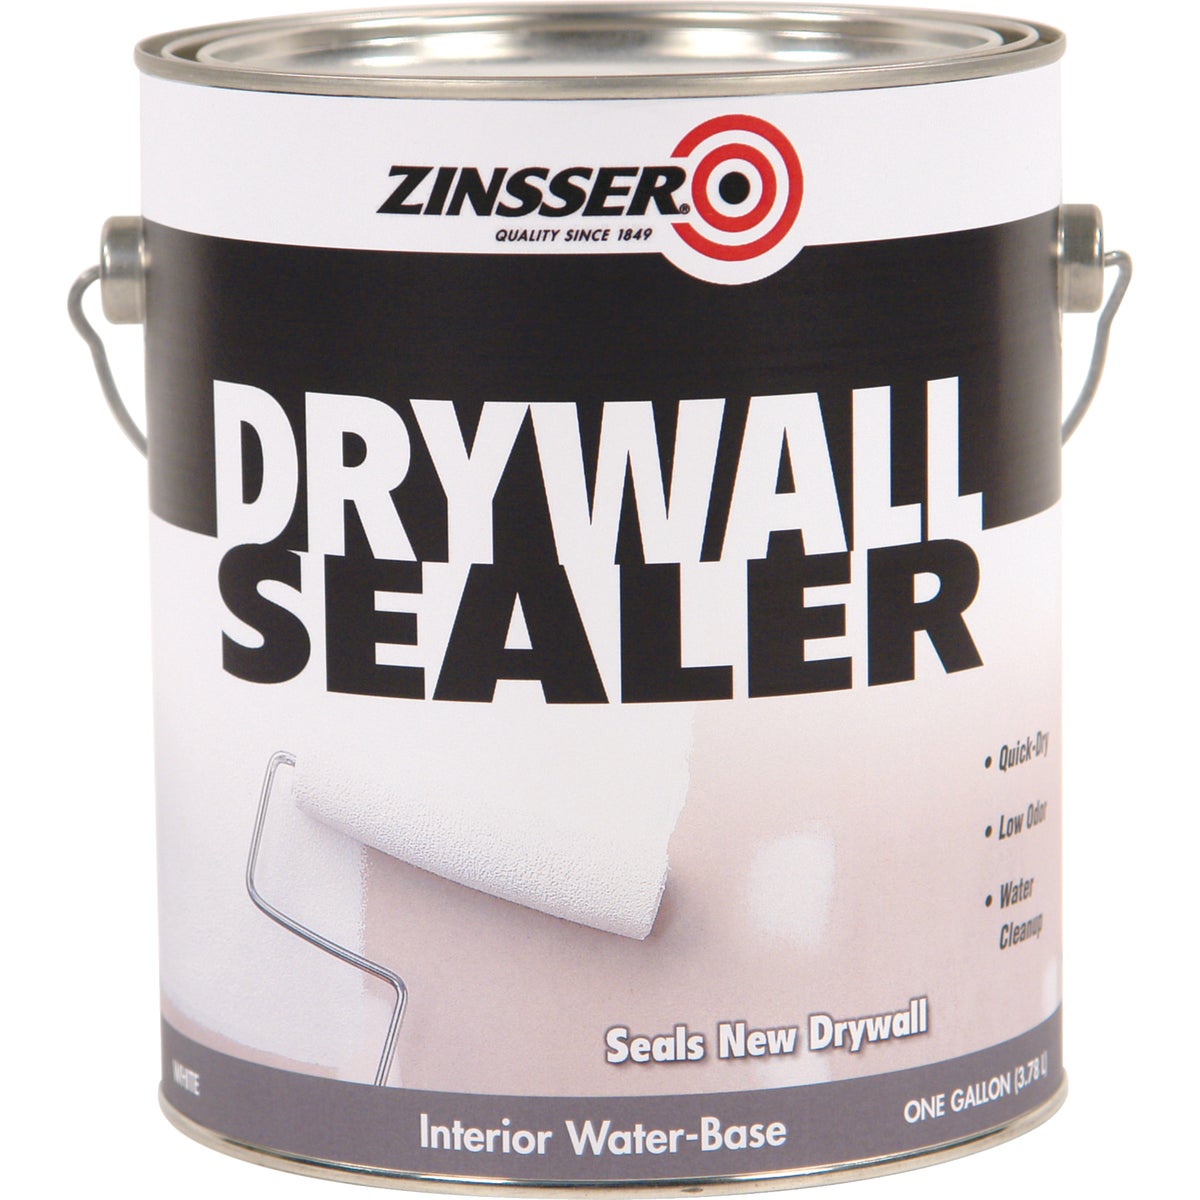 Item 782746, An ideal water based primer for sealing new drywall.